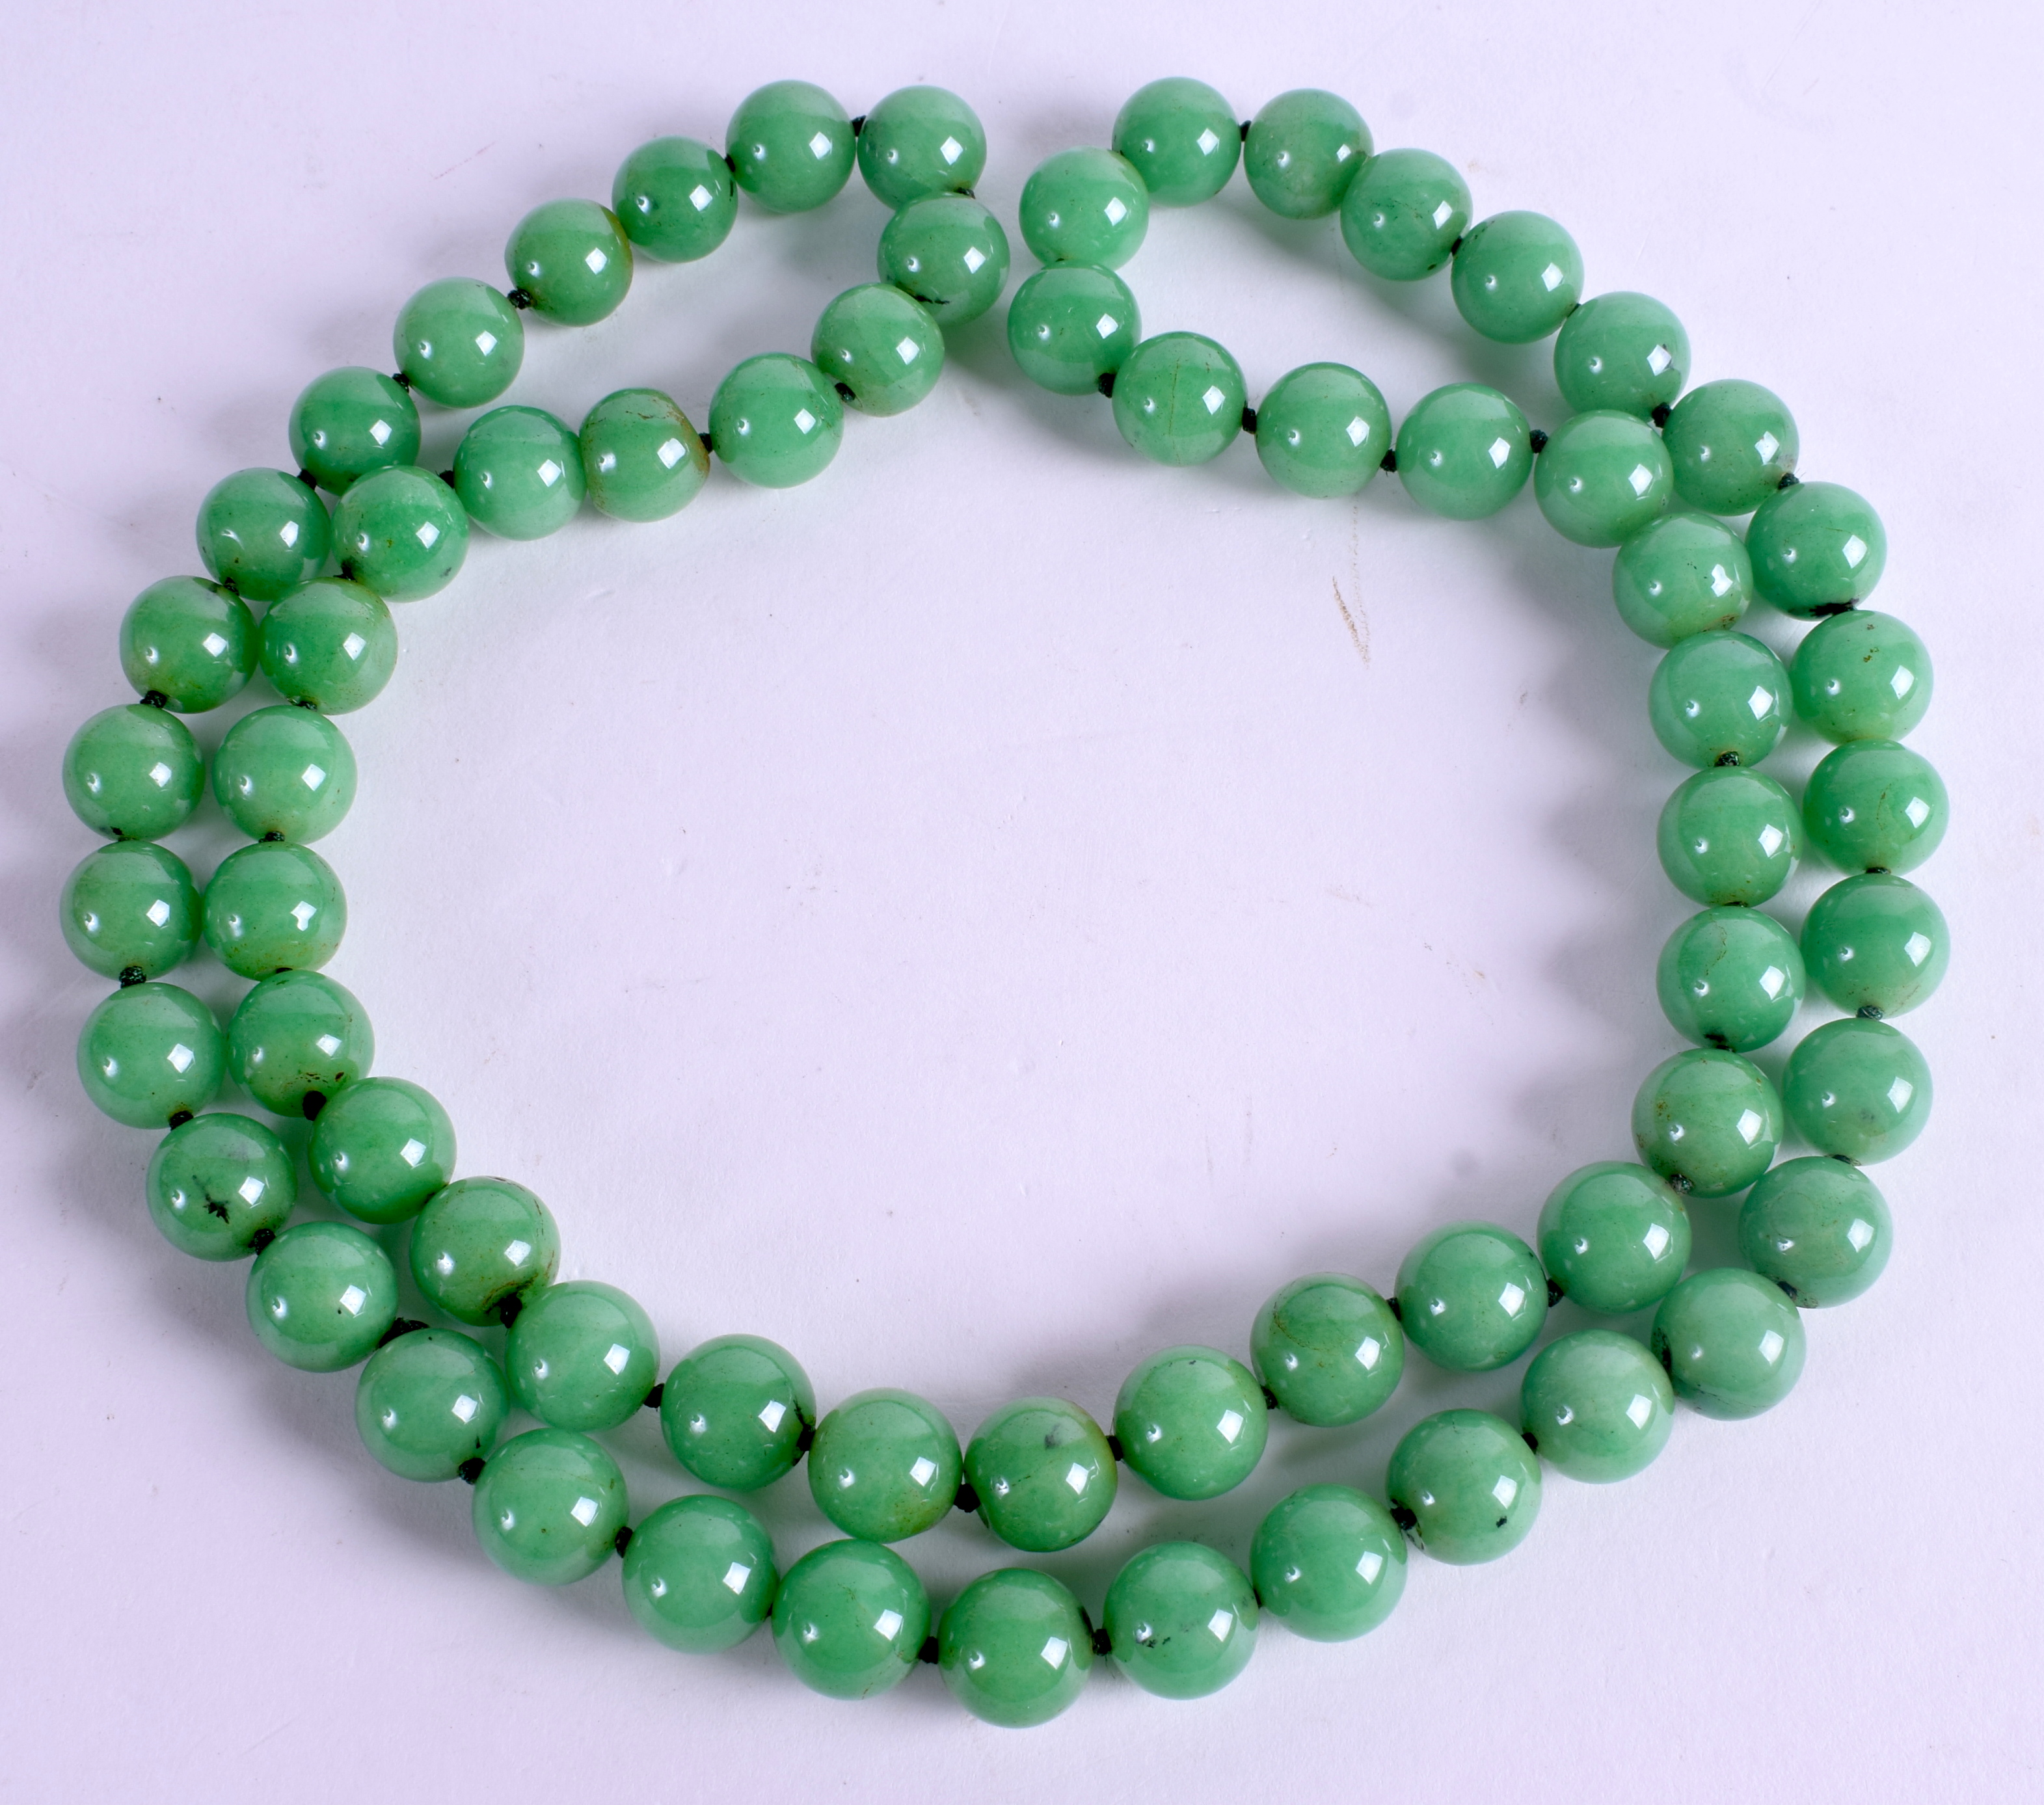 A CHINESE JADEITE NECKLACE. 80 cm long.